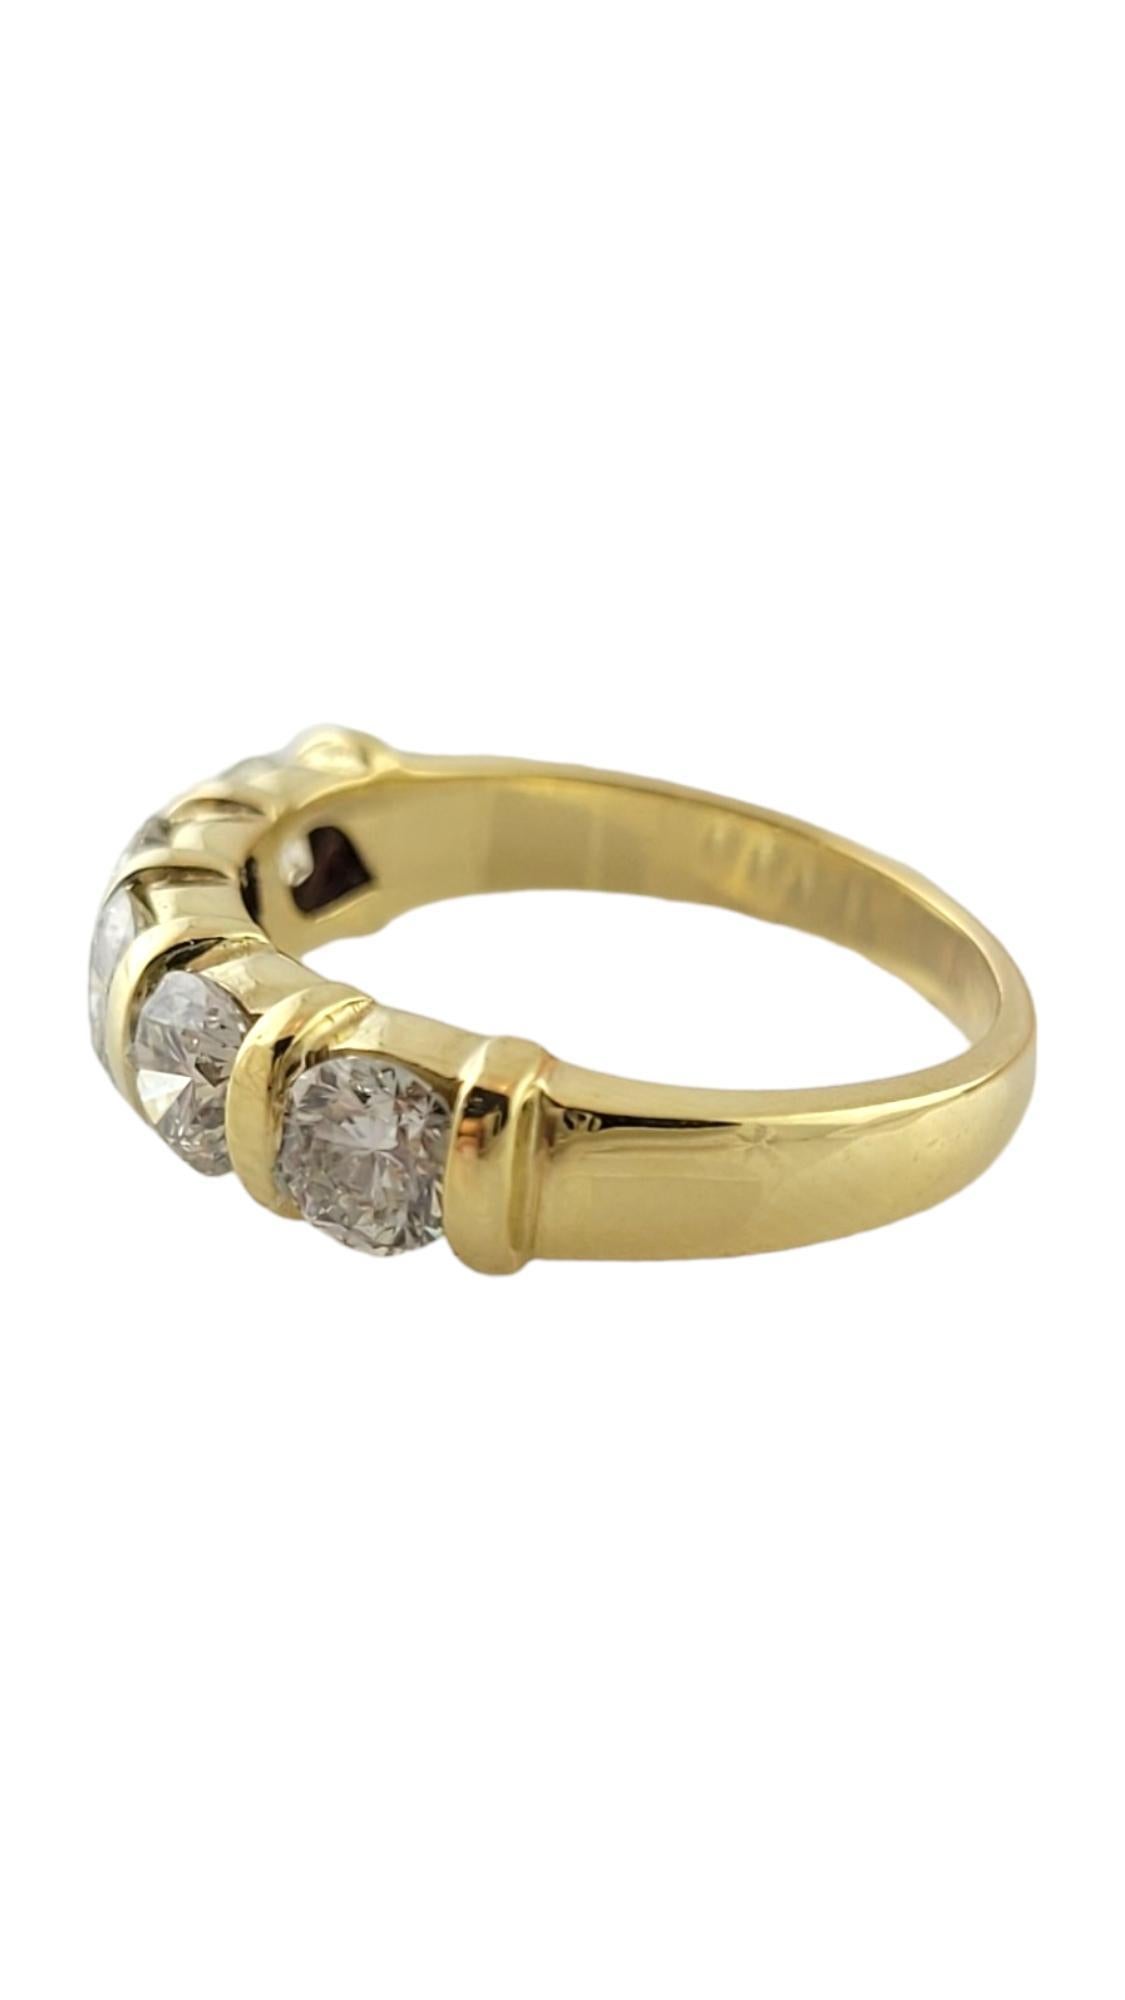 Vintage 18 Karat Yellow Gold and Diamond Wedding Band Ring Size 7.25

This sparkling band features five round brilliant cut diamonds set in classic 18K yellow gold. 

 Width:  5 mm.  Shank:  2.5 mm.

Approximate total diamond weight:  1.50